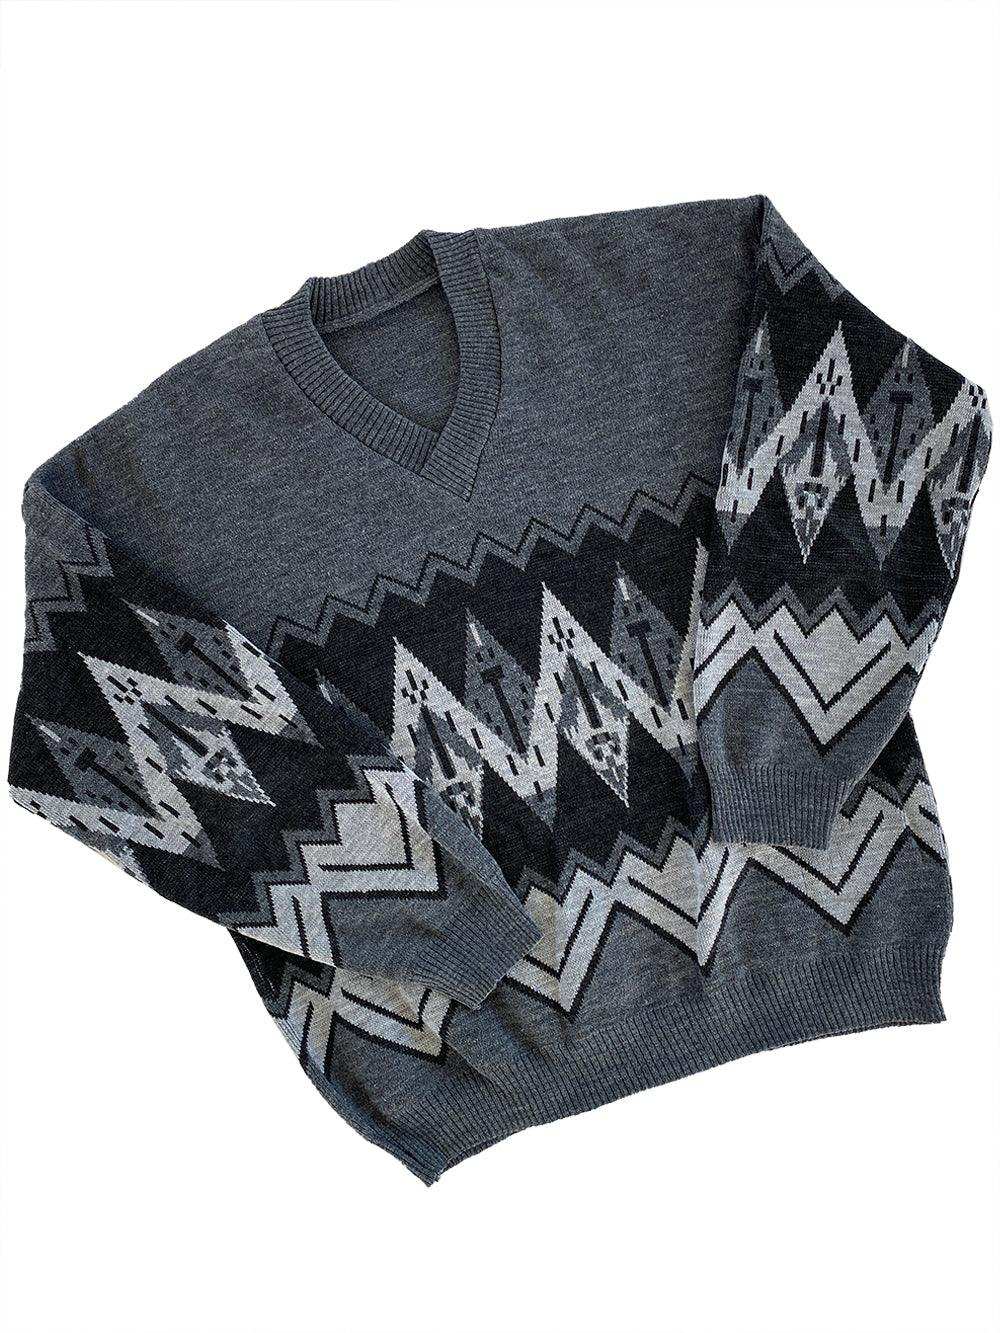 Vintage 80s/90s Unisex Knitted Geometric Sweater